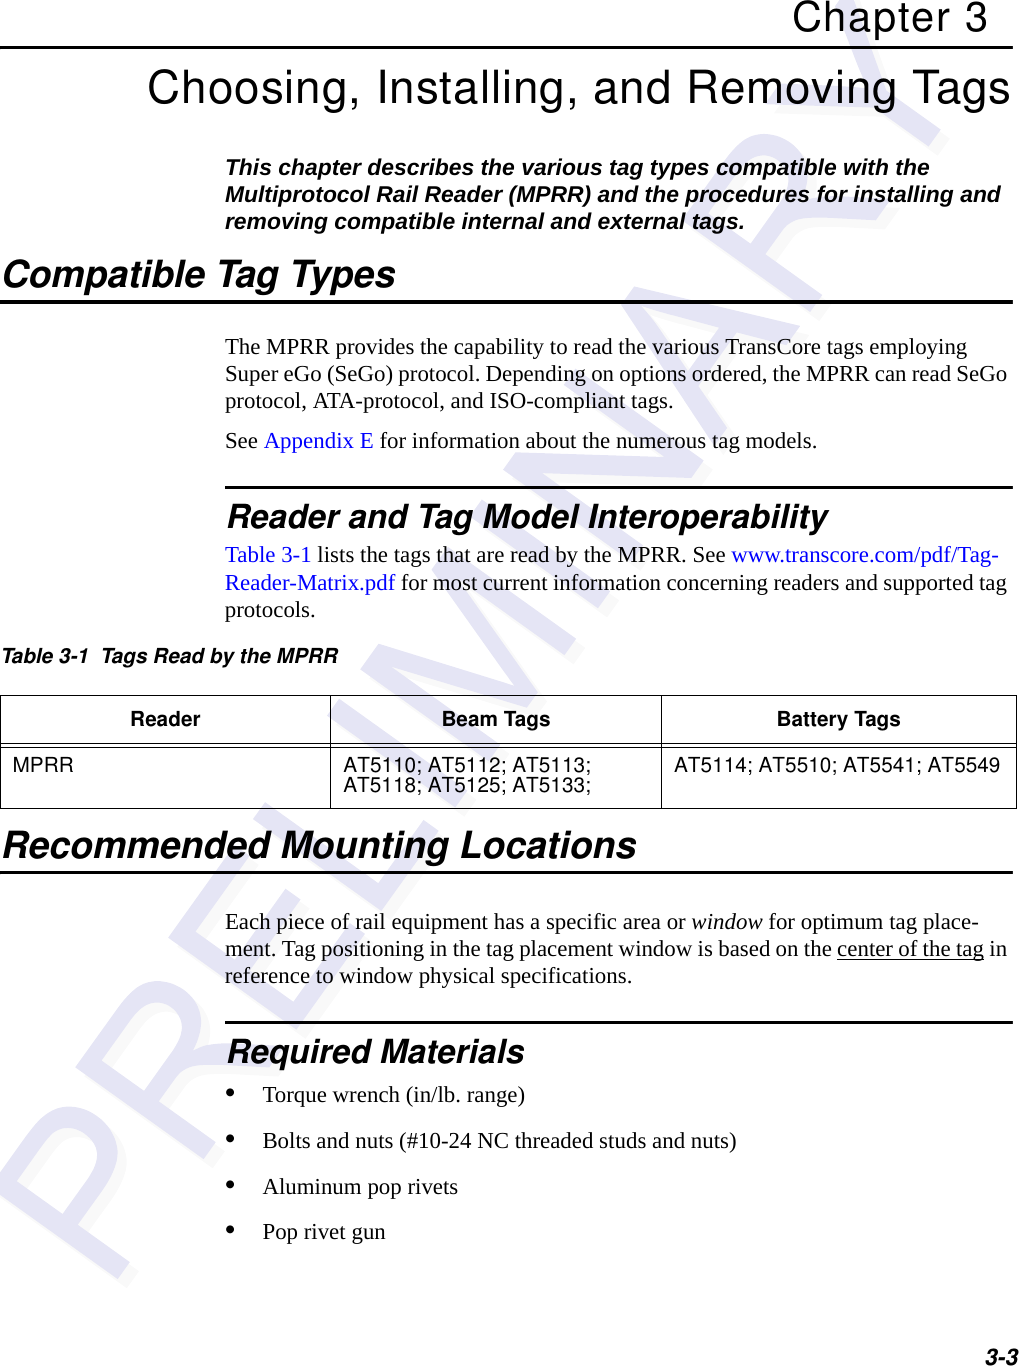 3-3Chapter 3Choosing, Installing, and Removing TagsThis chapter describes the various tag types compatible with the Multiprotocol Rail Reader (MPRR) and the procedures for installing and removing compatible internal and external tags. Compatible Tag TypesThe MPRR provides the capability to read the various TransCore tags employing Super eGo (SeGo) protocol. Depending on options ordered, the MPRR can read SeGo protocol, ATA-protocol, and ISO-compliant tags.See Appendix E for information about the numerous tag models.Reader and Tag Model InteroperabilityTable 3-1 lists the tags that are read by the MPRR. See www.transcore.com/pdf/Tag-Reader-Matrix.pdf for most current information concerning readers and supported tag protocols.Recommended Mounting LocationsEach piece of rail equipment has a specific area or window for optimum tag place-ment. Tag positioning in the tag placement window is based on the center of the tag in reference to window physical specifications.Required Materials•Torque wrench (in/lb. range)•Bolts and nuts (#10-24 NC threaded studs and nuts)•Aluminum pop rivets•Pop rivet gunTable 3-1  Tags Read by the MPRRReader Beam Tags Battery TagsMPRR AT5110; AT5112; AT5113; AT5118; AT5125; AT5133;  AT5114; AT5510; AT5541; AT5549